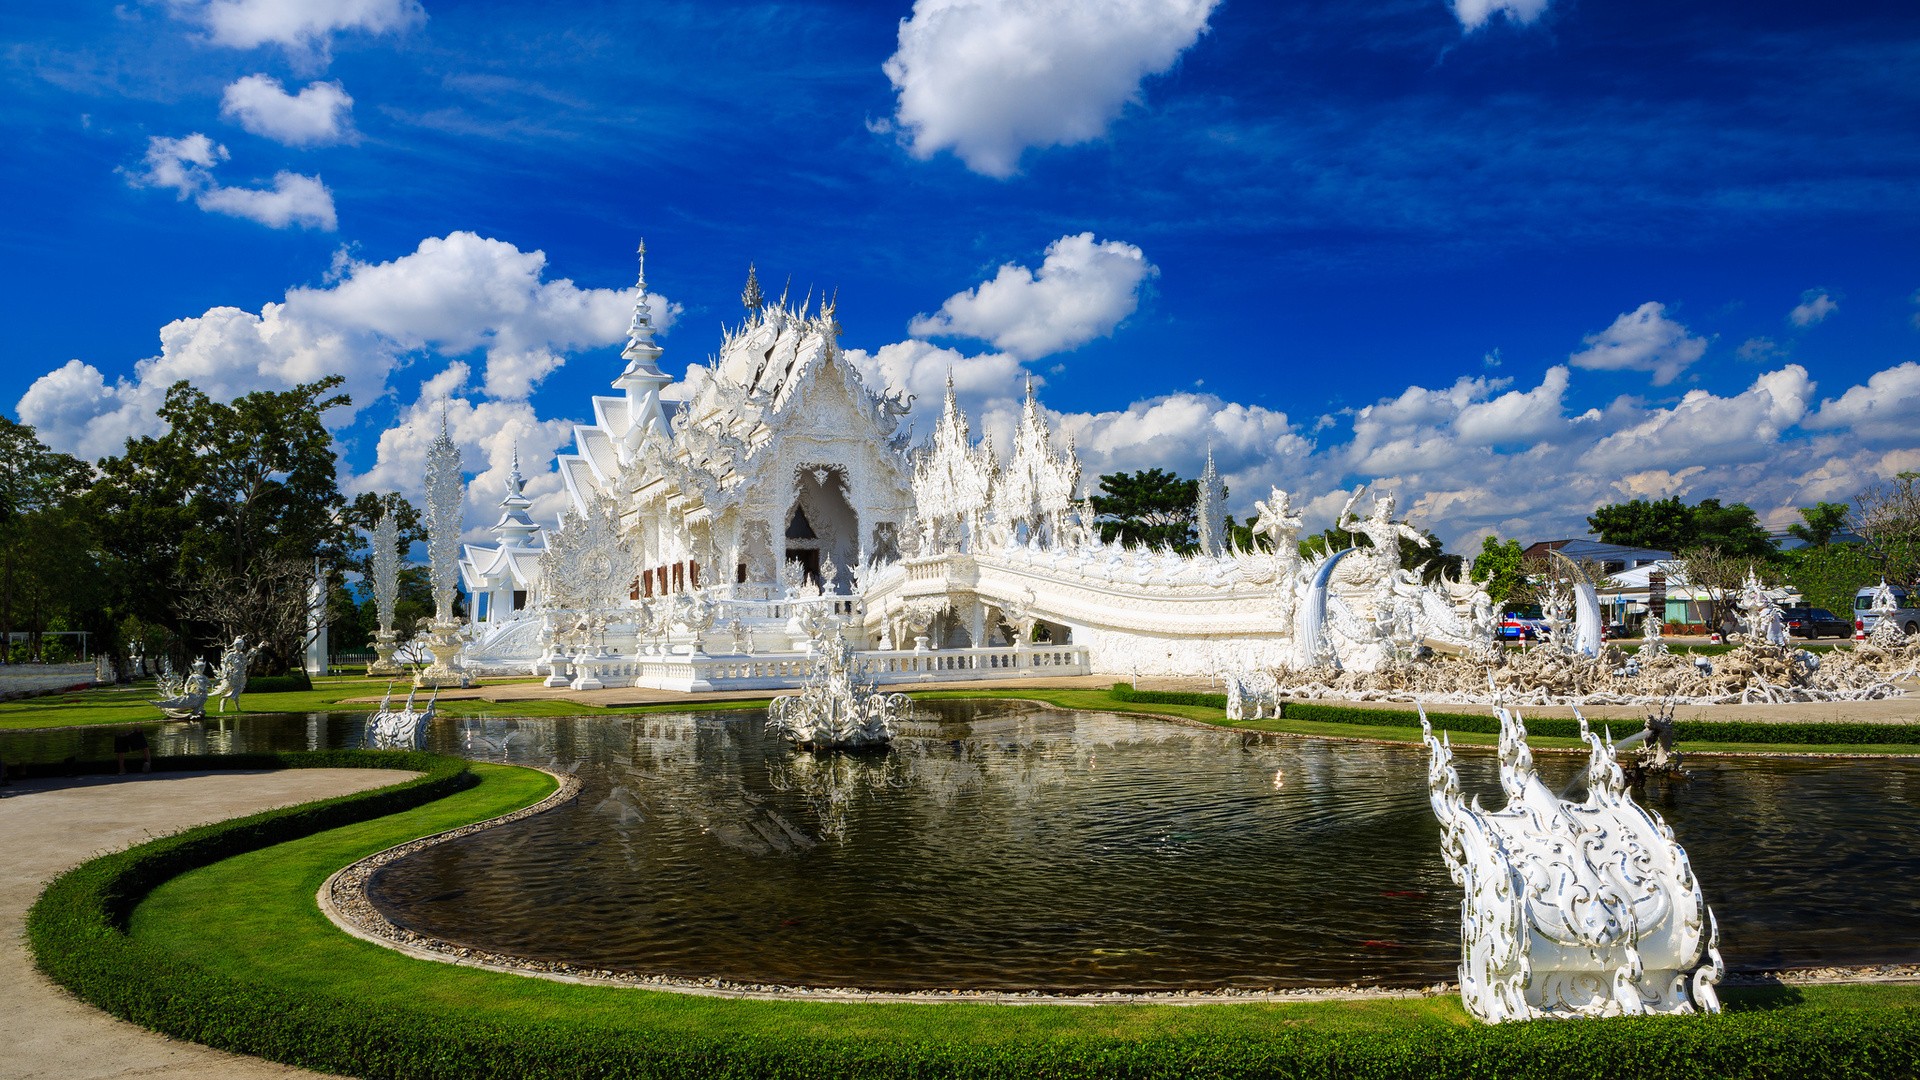 General 1920x1080 architecture Wat Rong Khun temple Thailand Asia sky clouds building